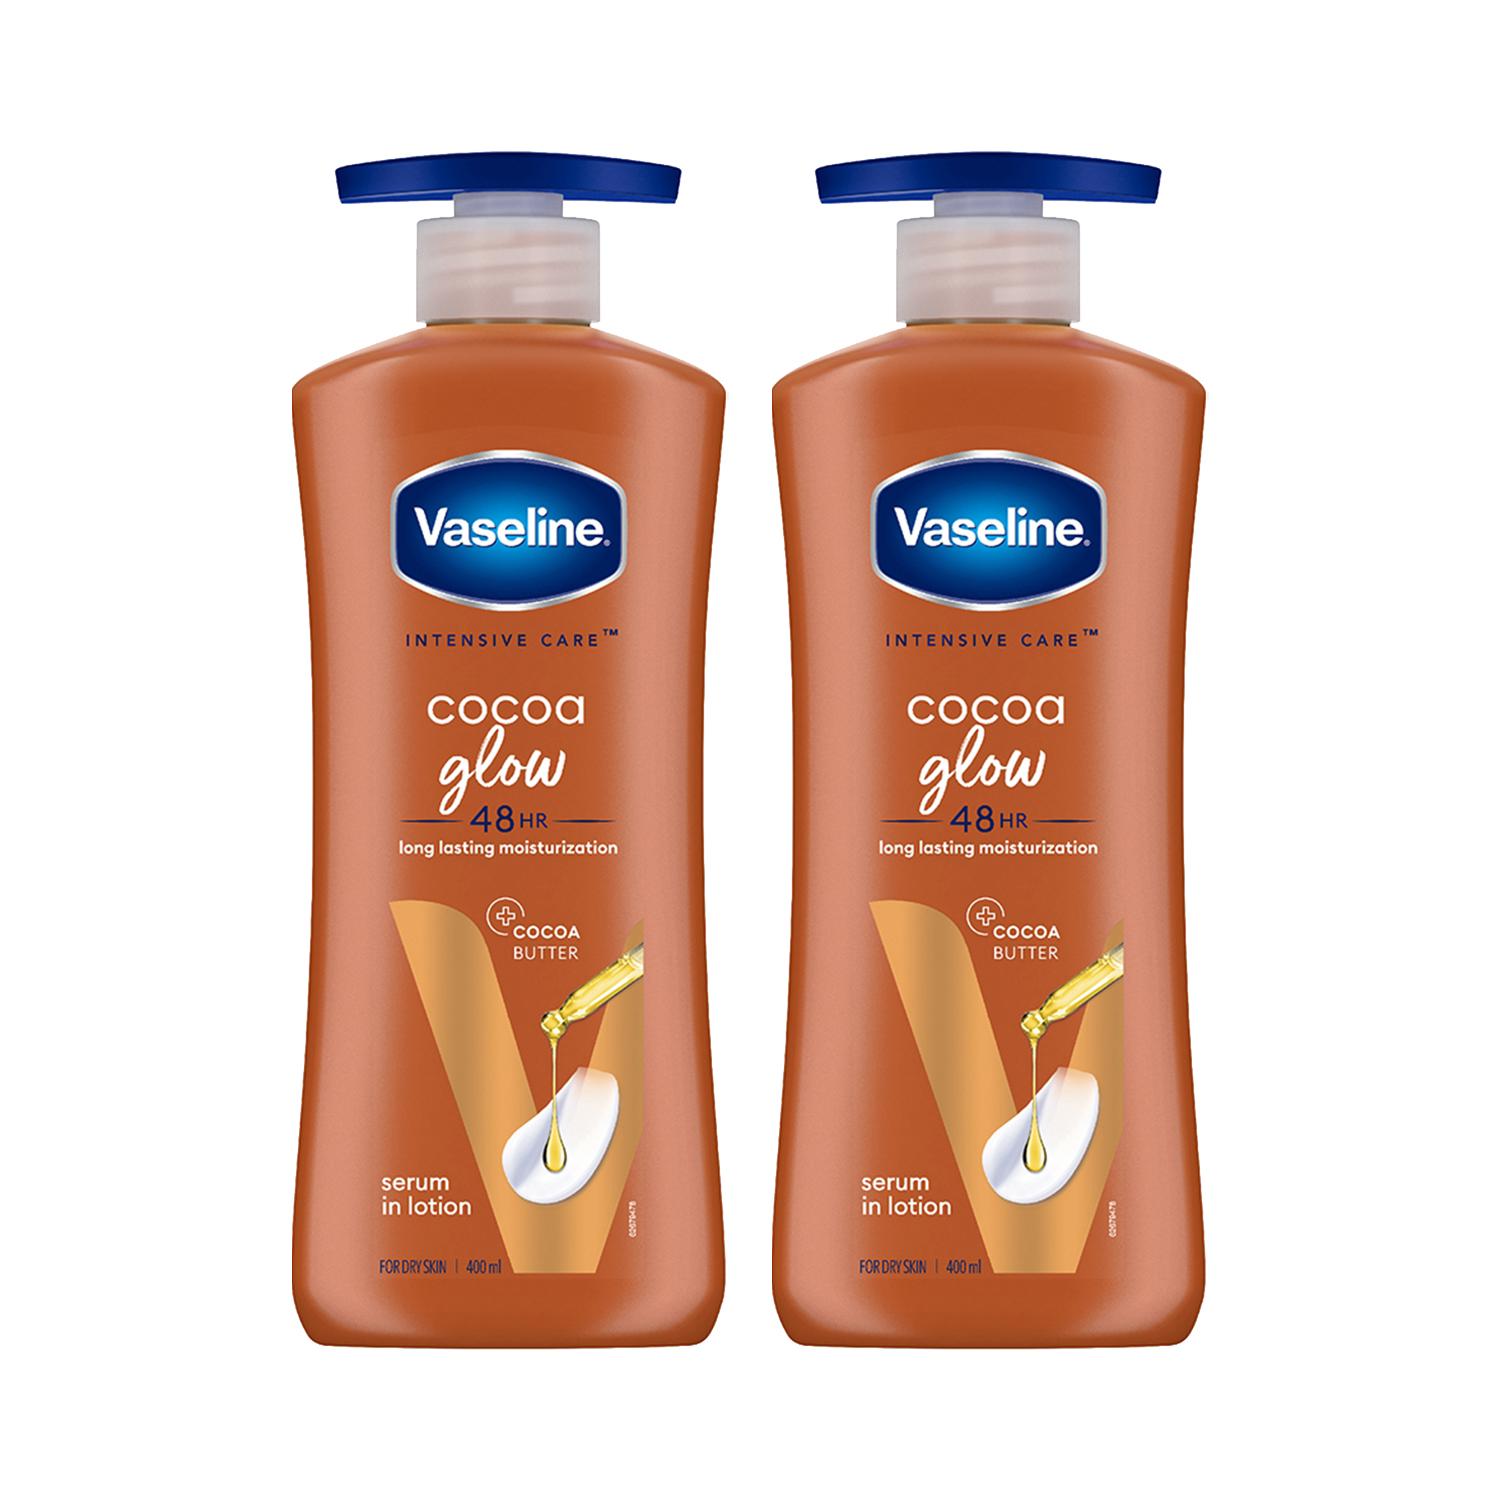 Vaseline | Vaseline Intensive Care Cocoa Glow With Pure Cocoa & Shea Butter Combo